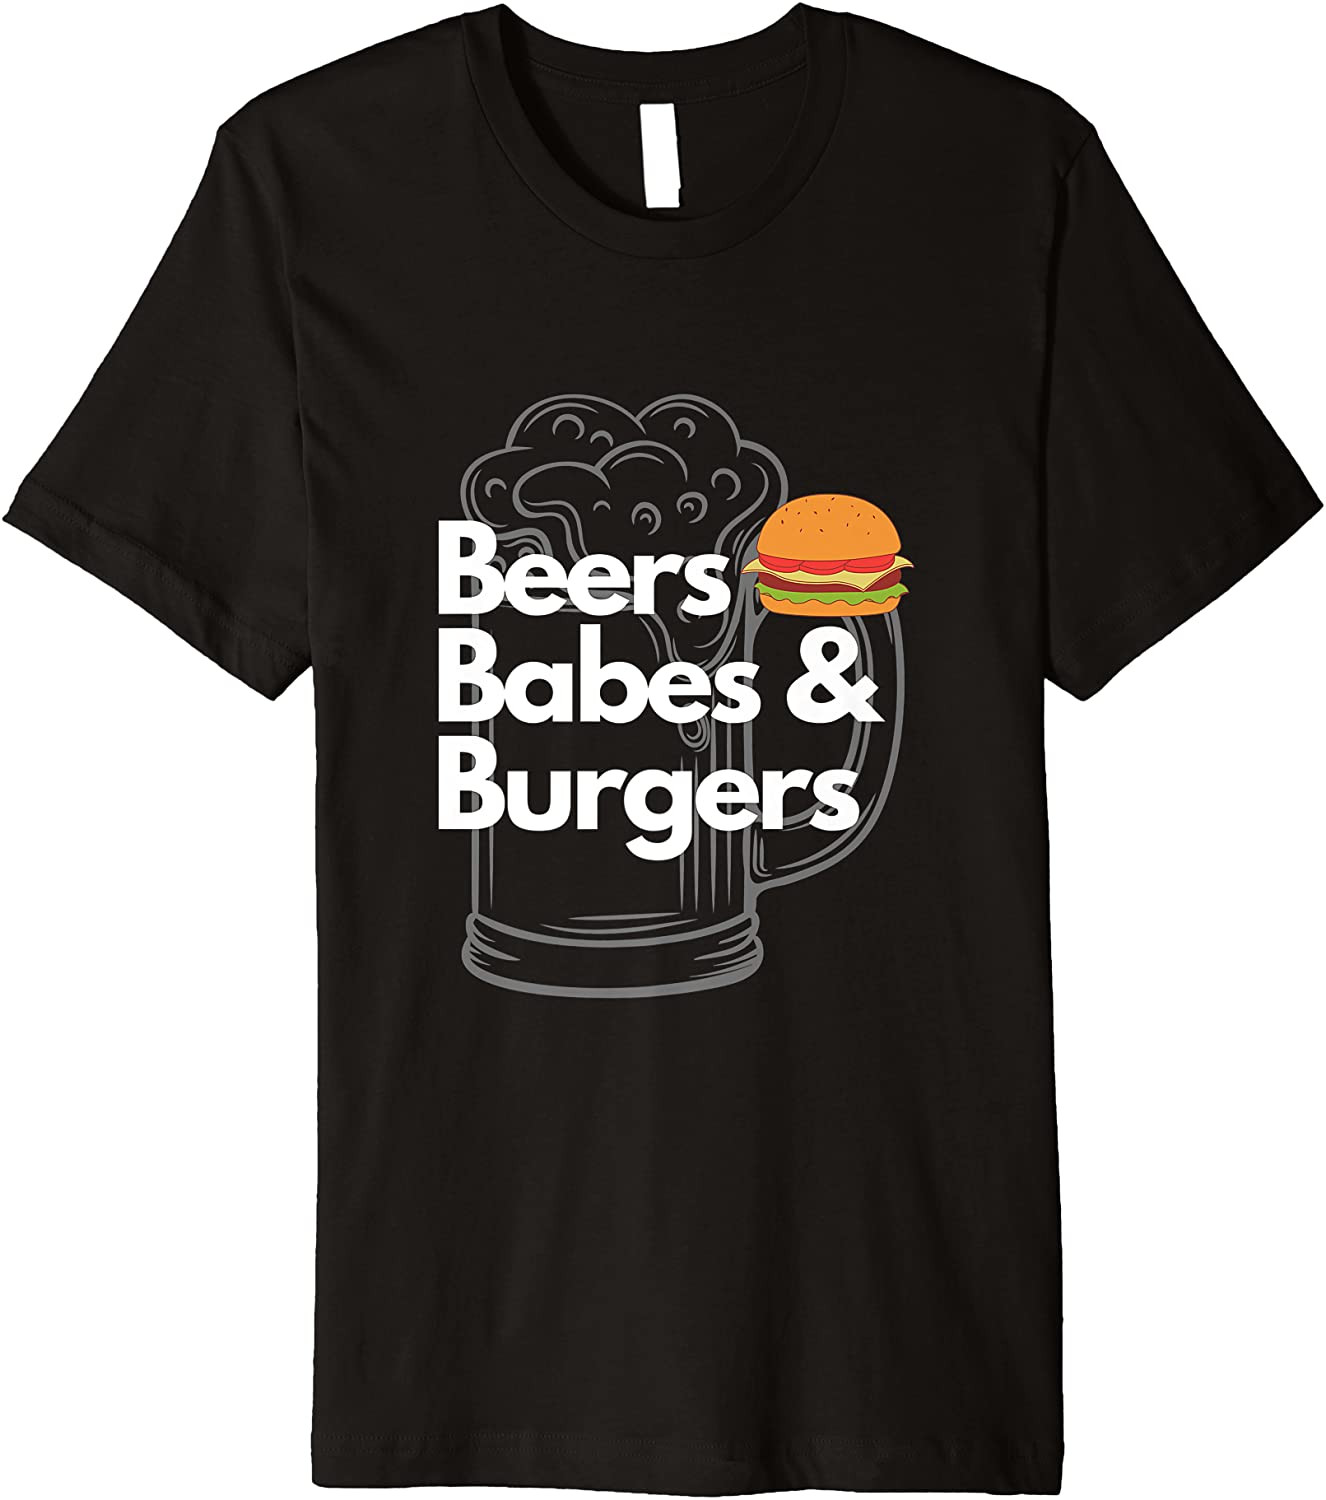 Beers Babes Burgers T-Shirt